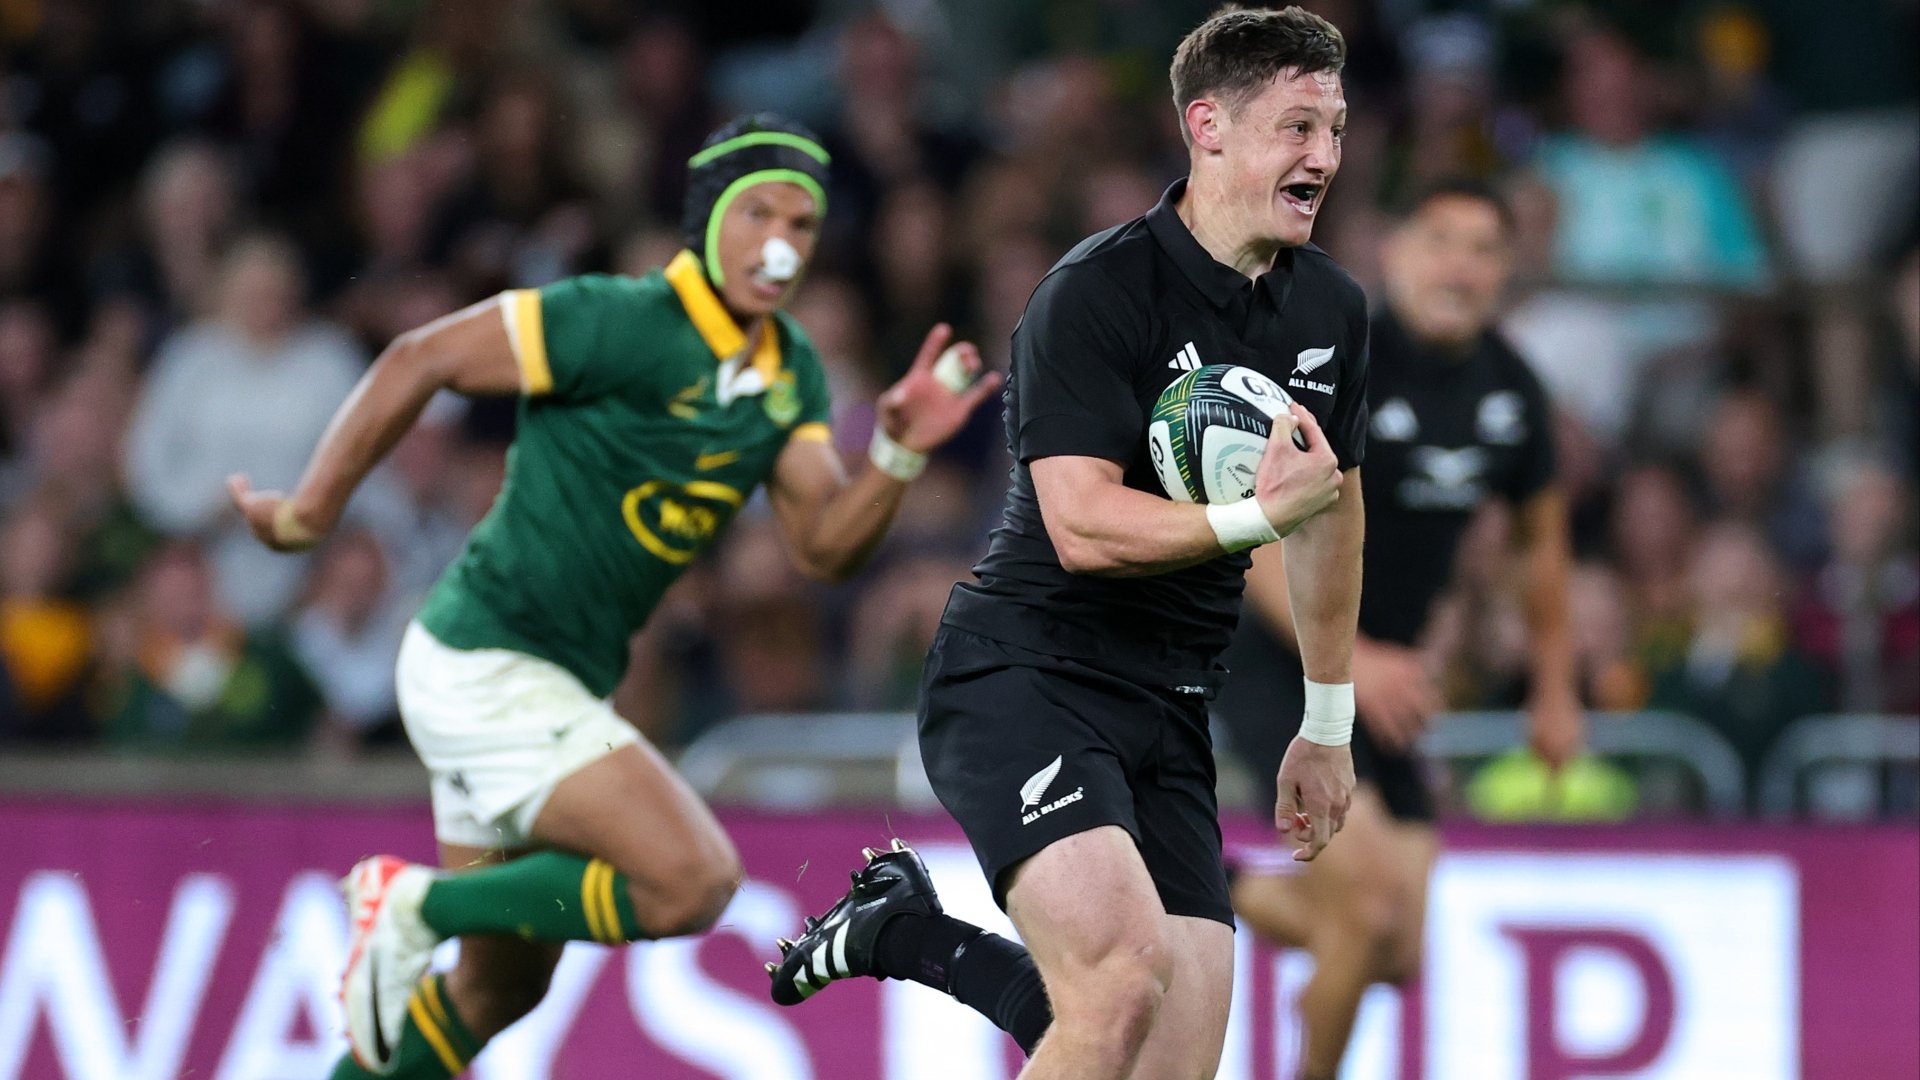 2023 Rugby World Cup Final Odds - Springboks slight underdogs for RWC final